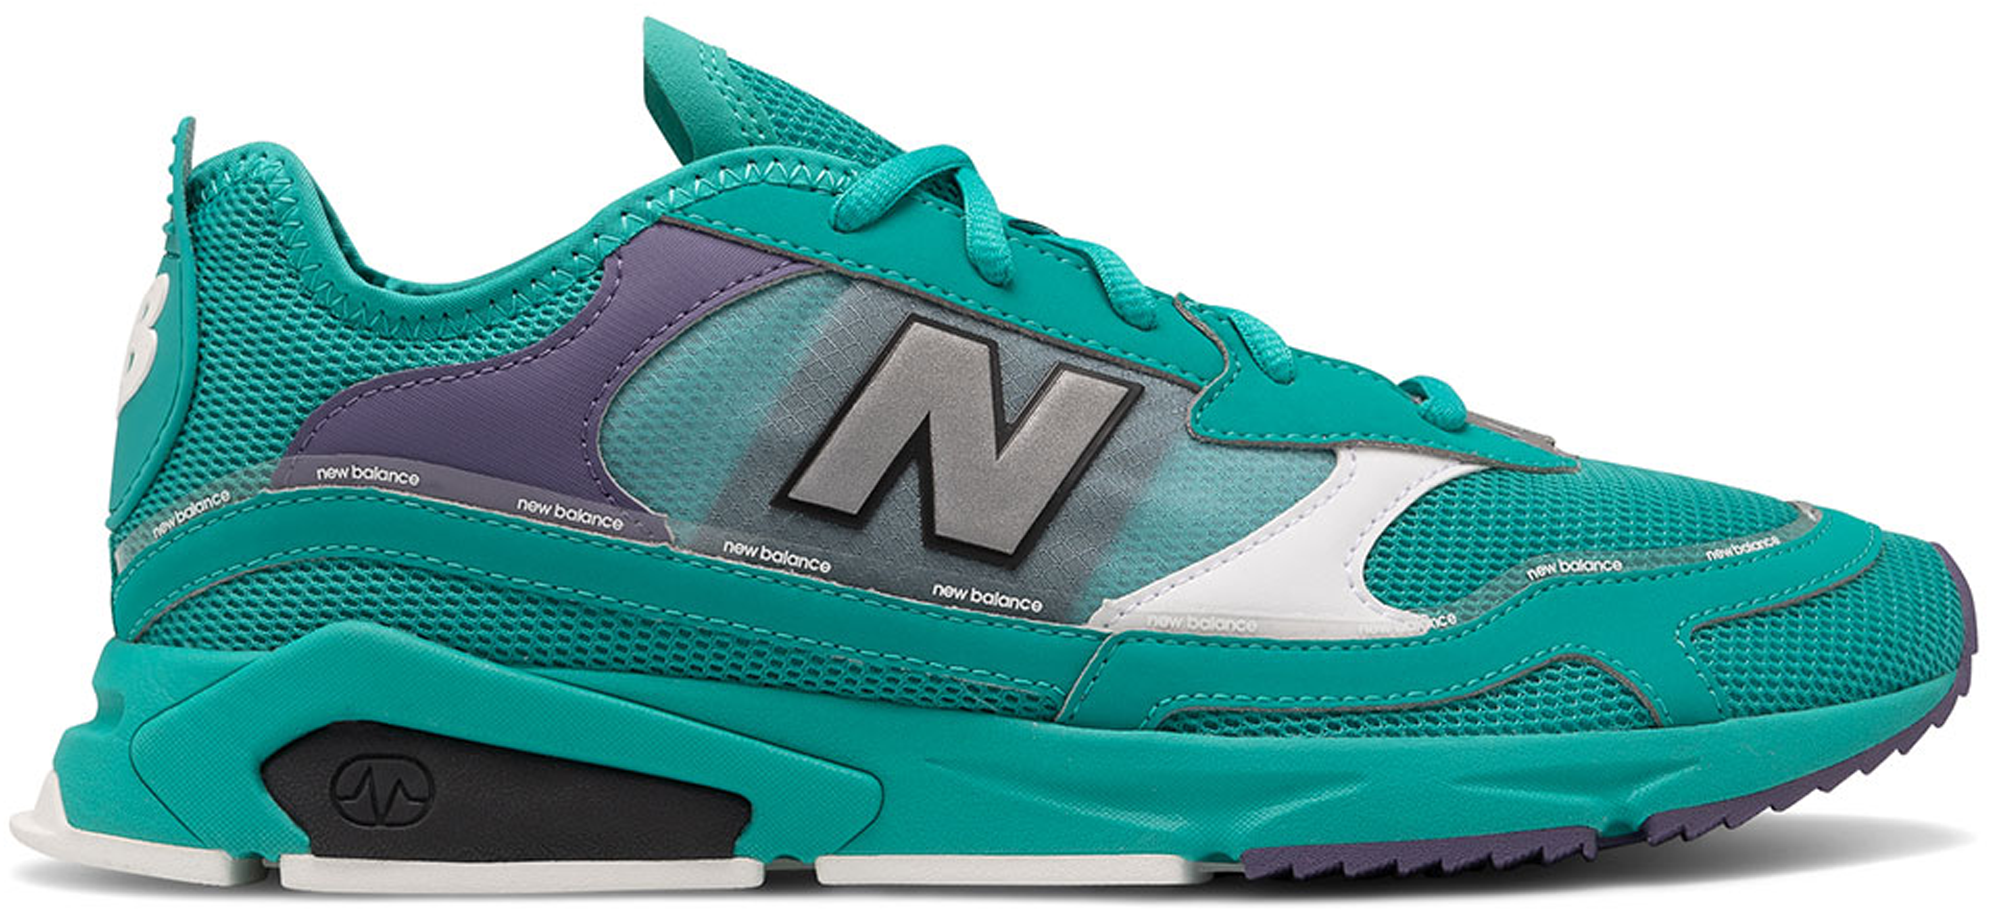 New Balance X-Racer Teal - Sneakers